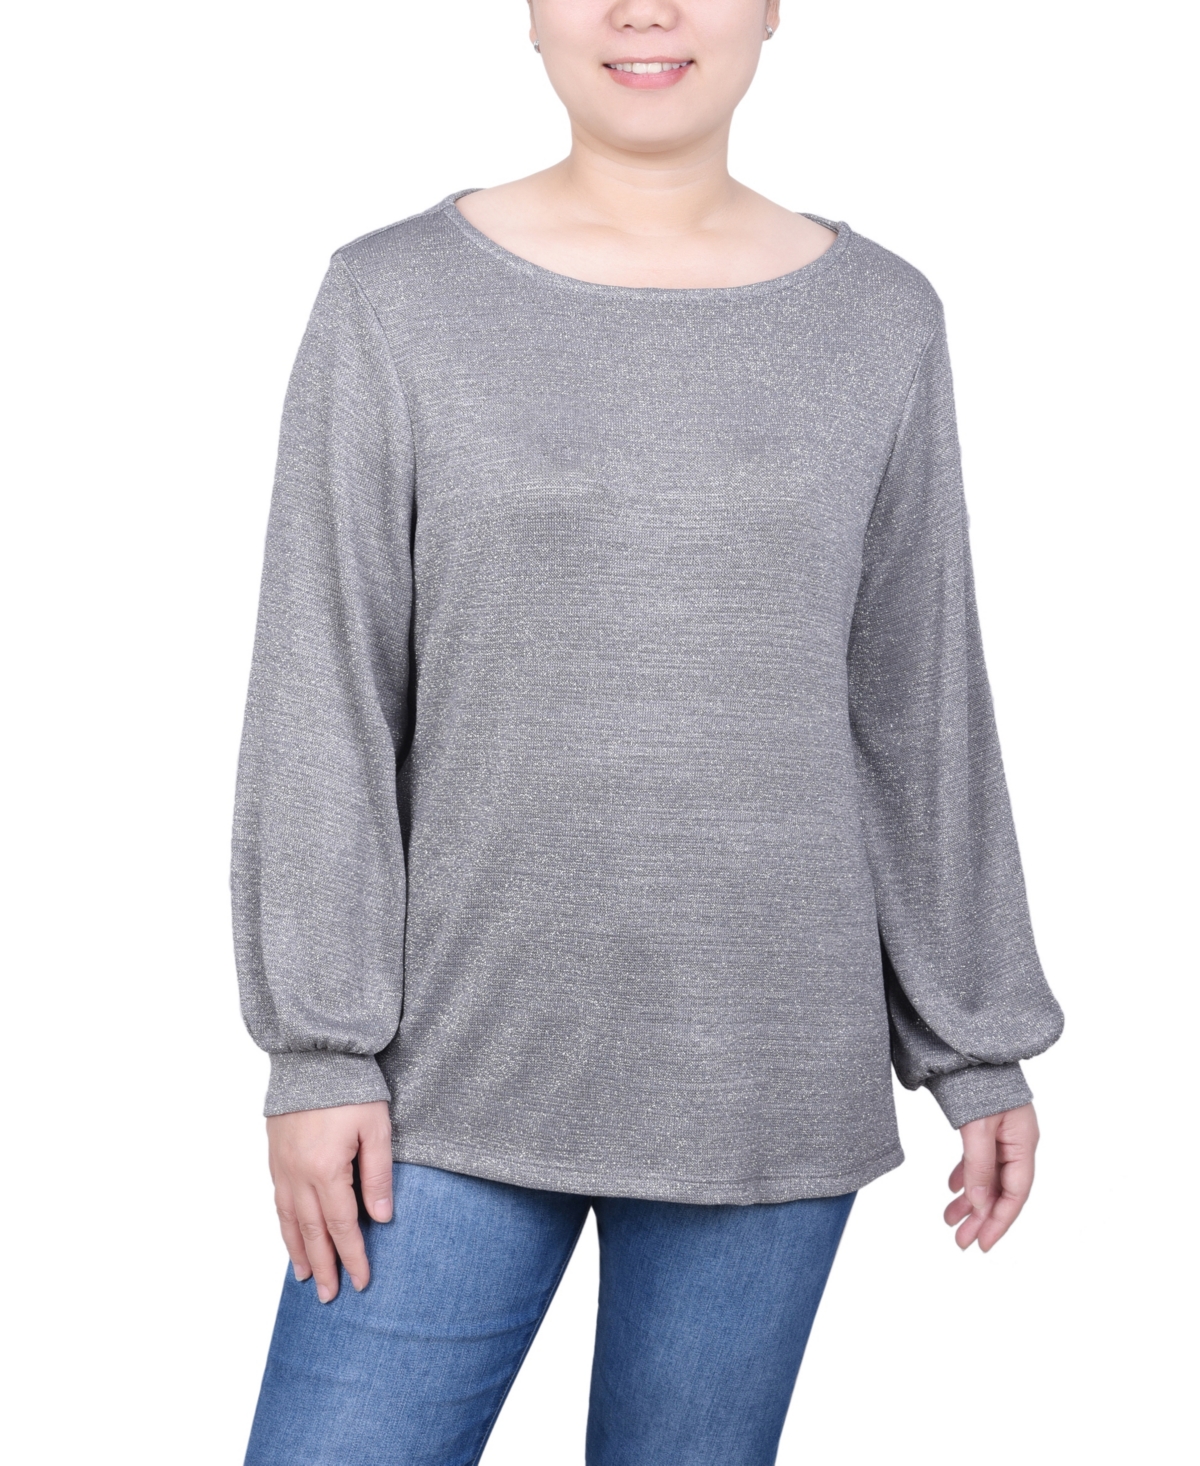 NY COLLECTION WOMEN'S LONG SLEEVE TUNIC TOP